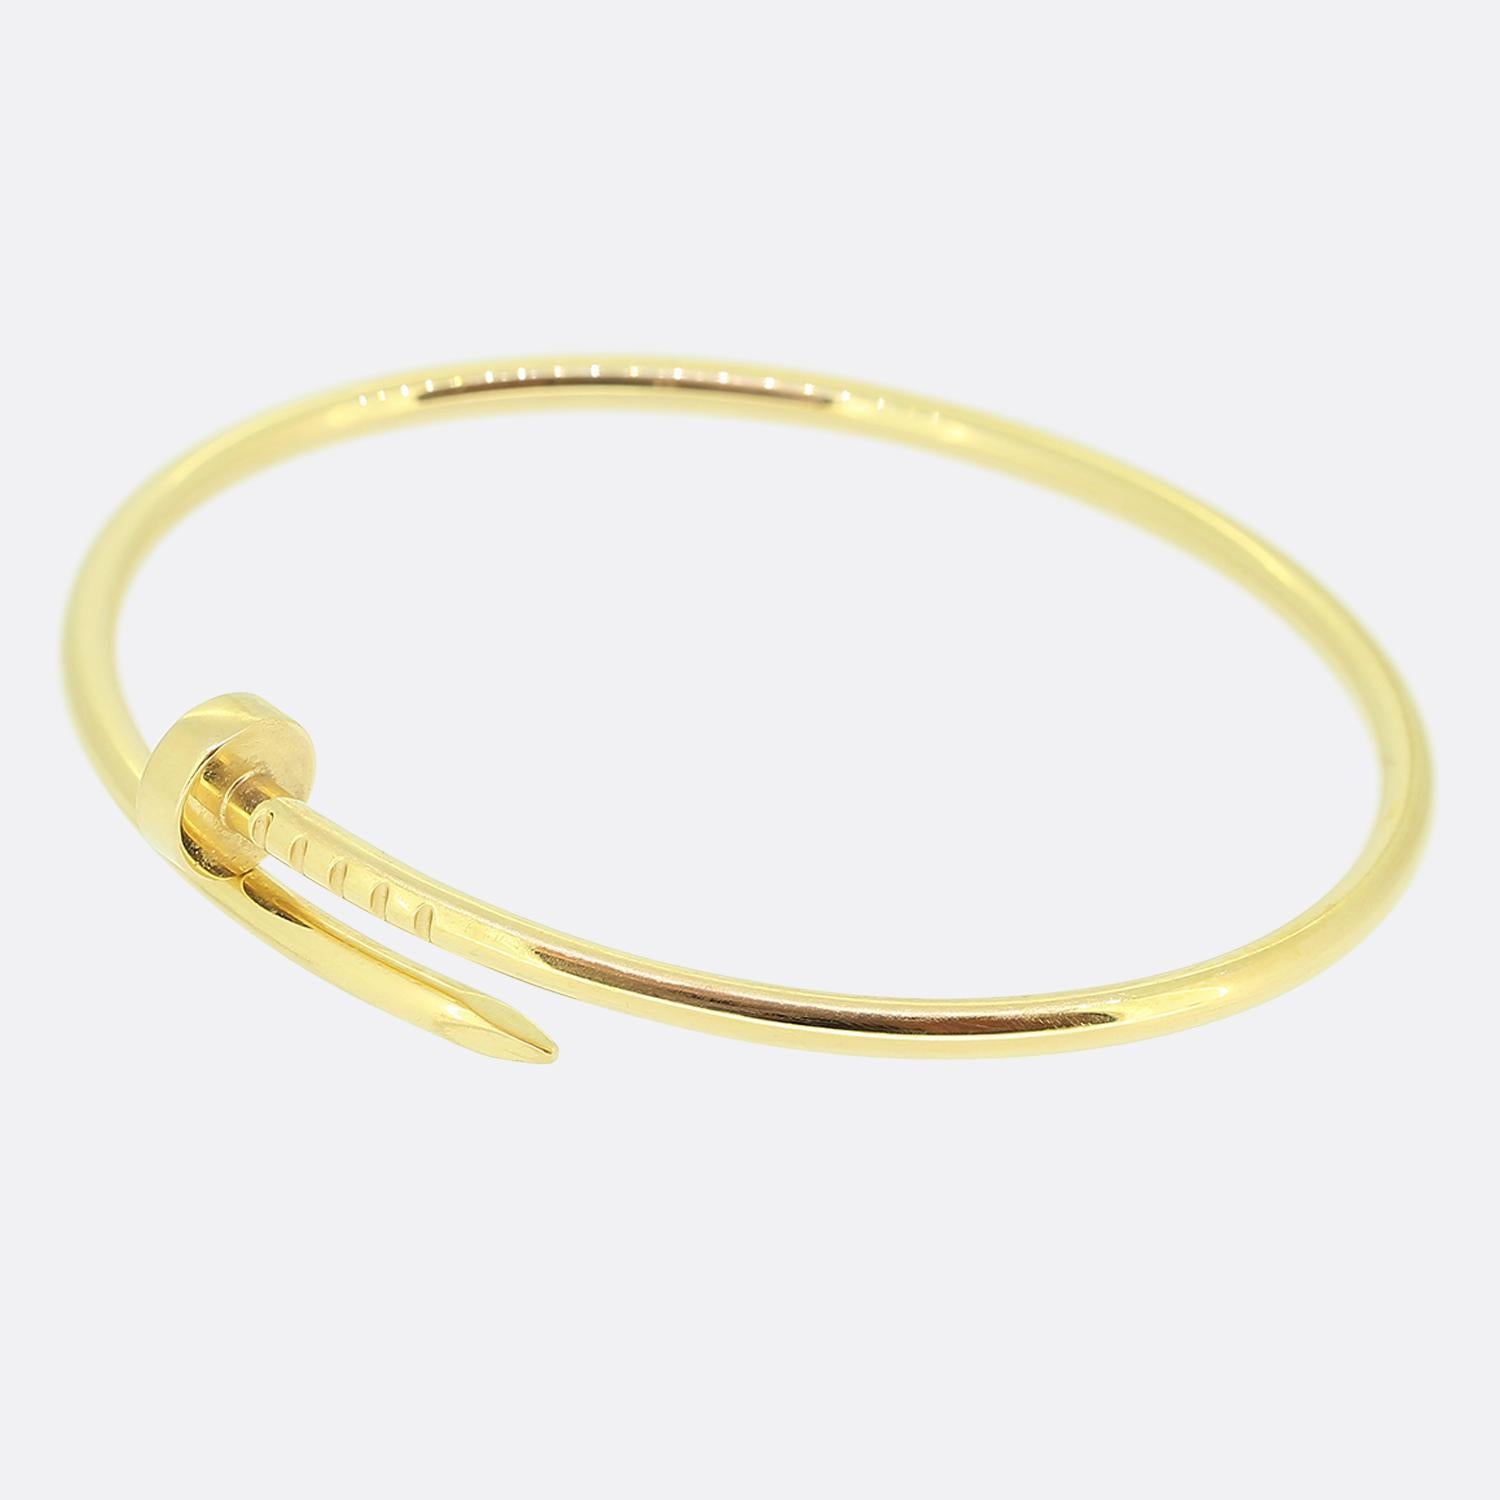 Here we have an 18ct yellow gold bracelet from the luxury jewellery house of Cartier. The particular piece forms part of the world renowned 'Juste un Clou' collection and showcases a wrap around nail design. This is the small model which allows the